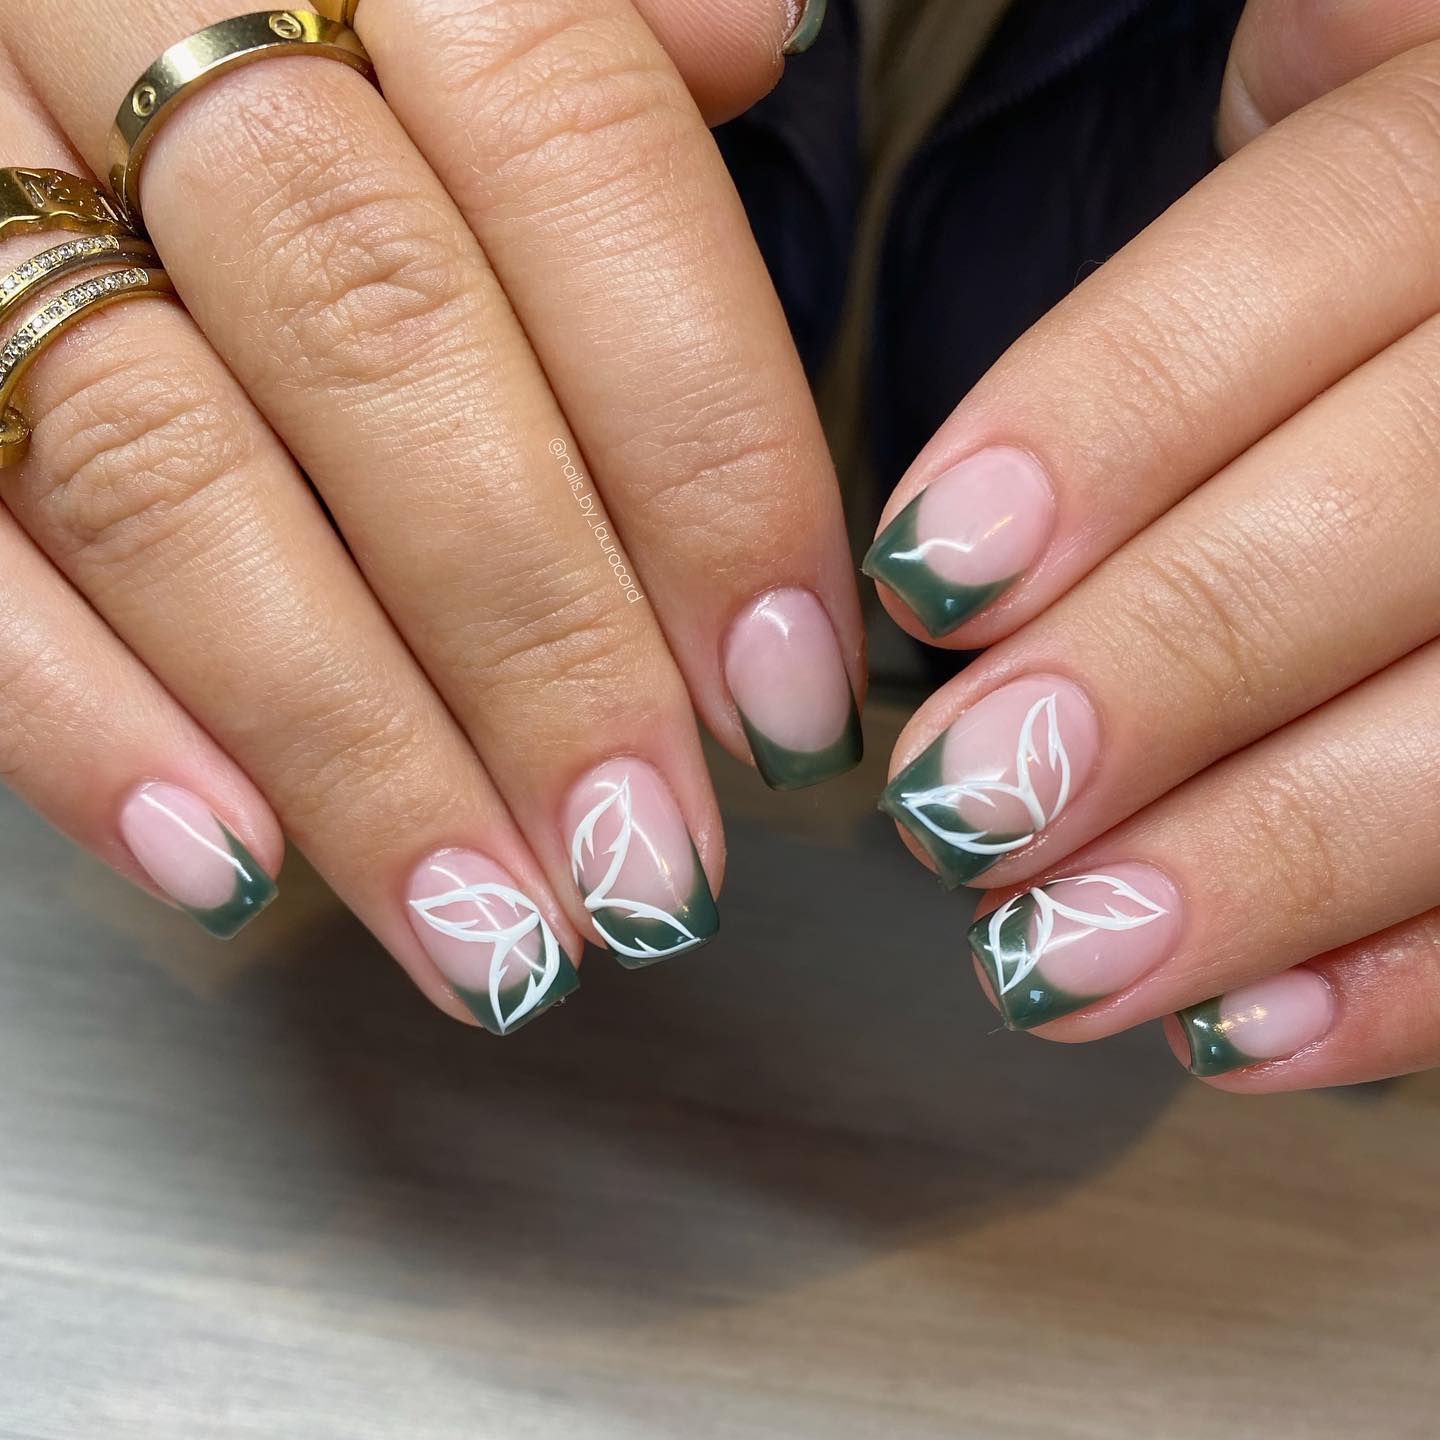 Green French Tip Nails